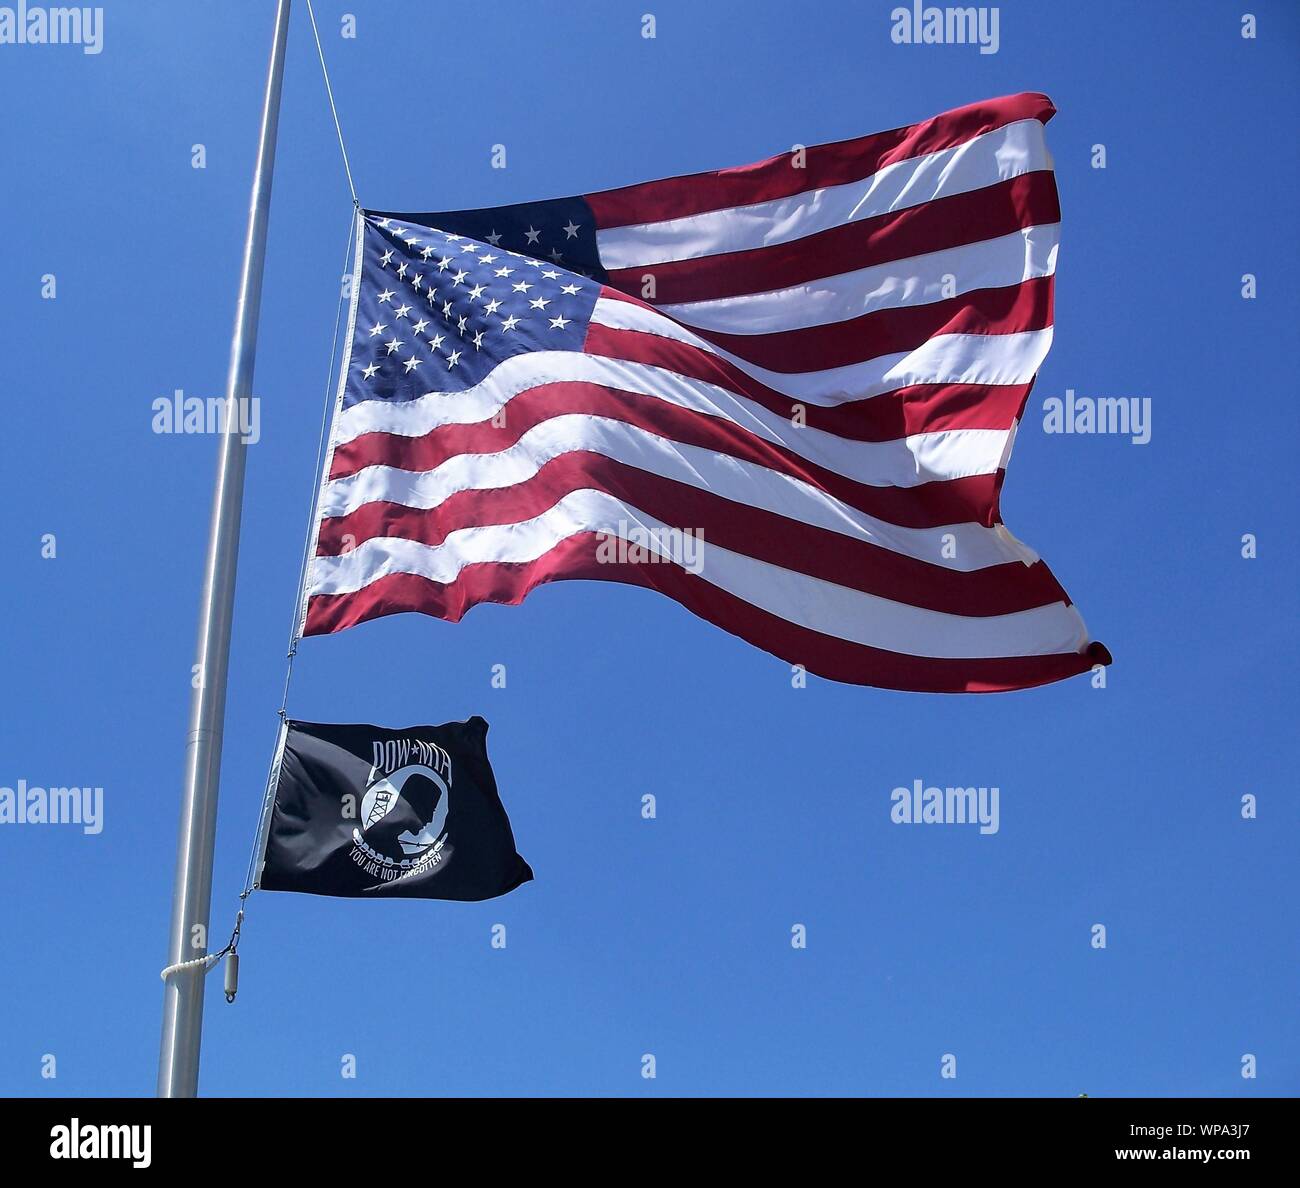 United States of America and Prisoner of War flags on a flagpole with a clear blue sky background Stock Photo